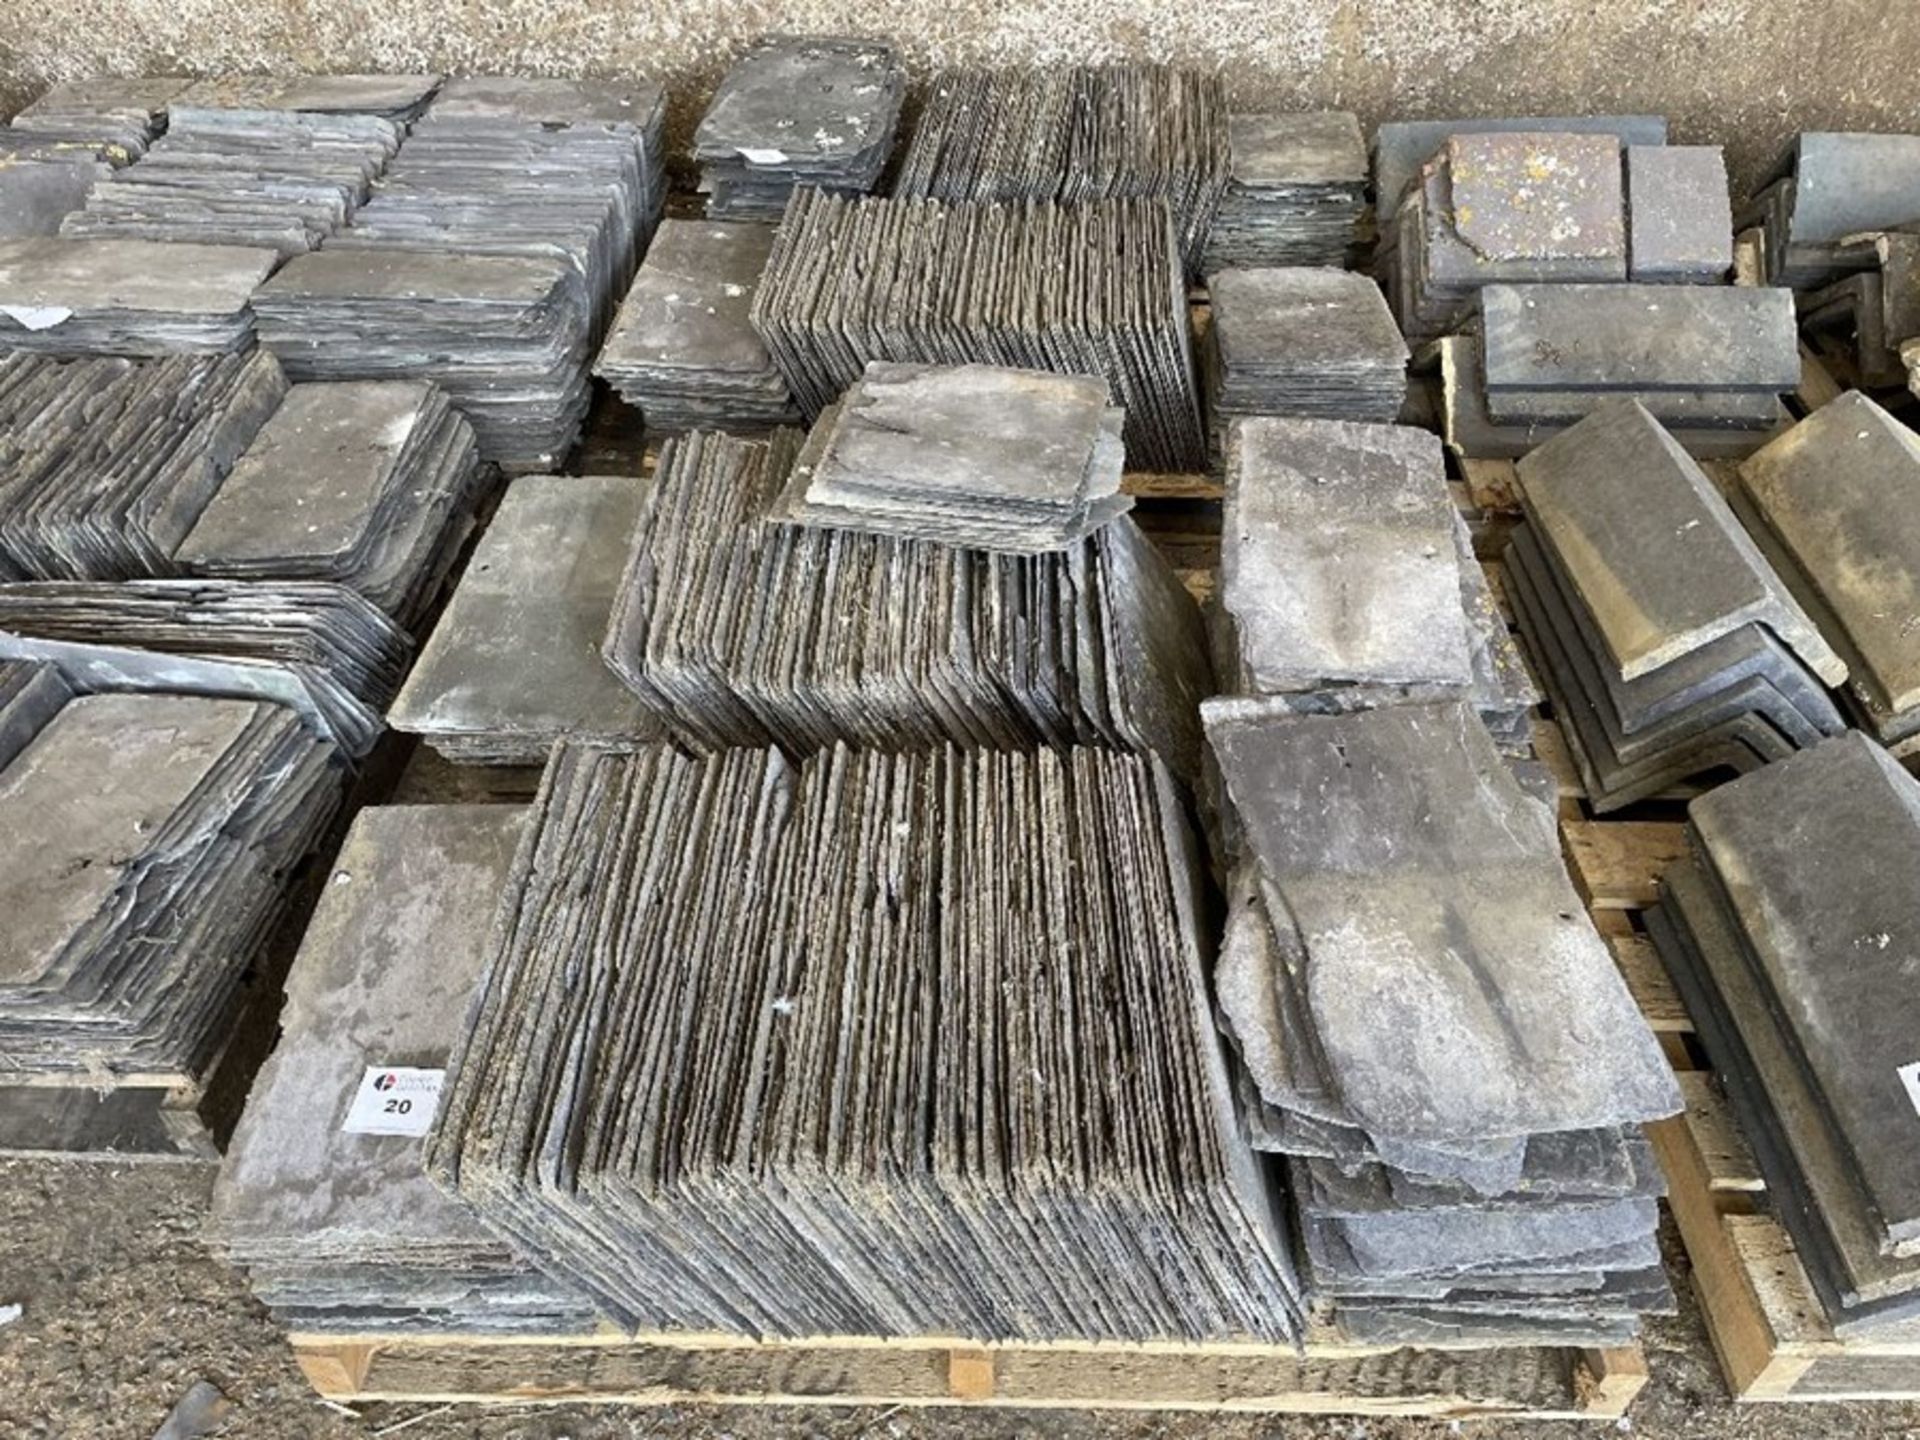 2 x Pallets roof slate tiles approx 18" x 10"